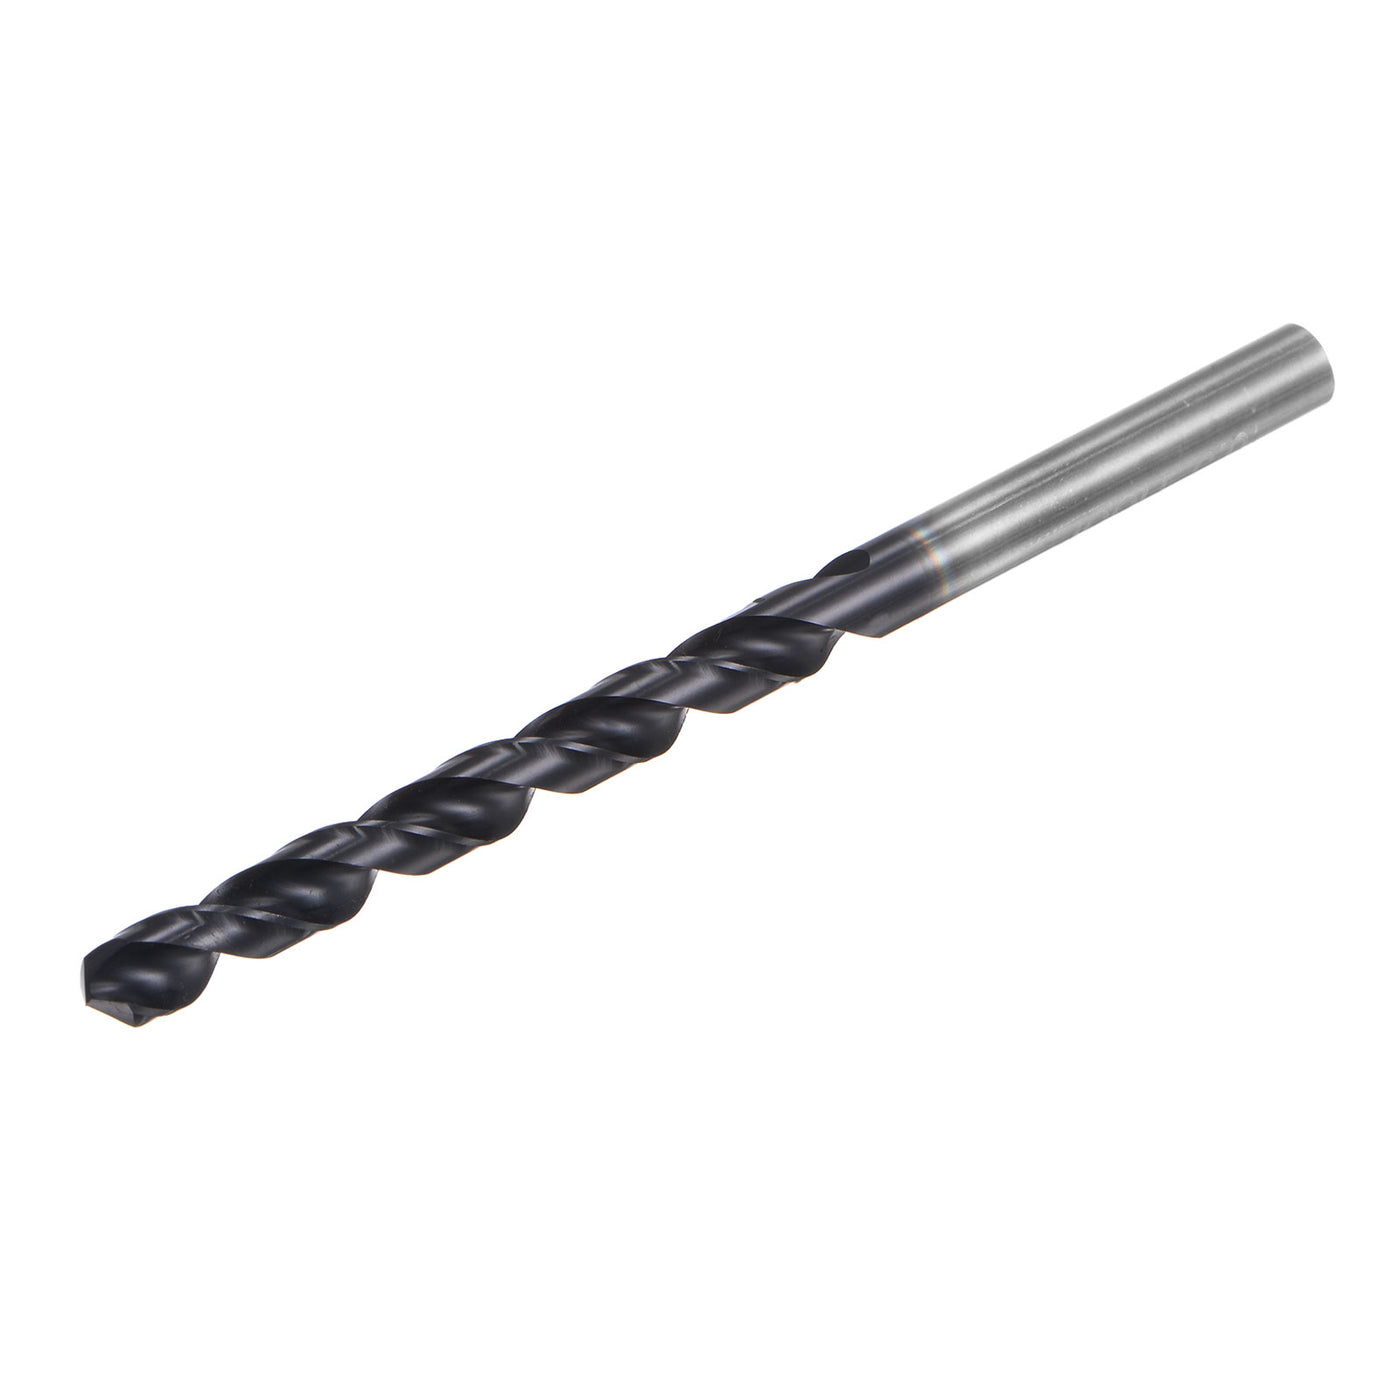 uxcell Uxcell 6.3mm M42 High Speed Steel Twist Drill Bits, TiCN Coated Round Shank Drill Bit